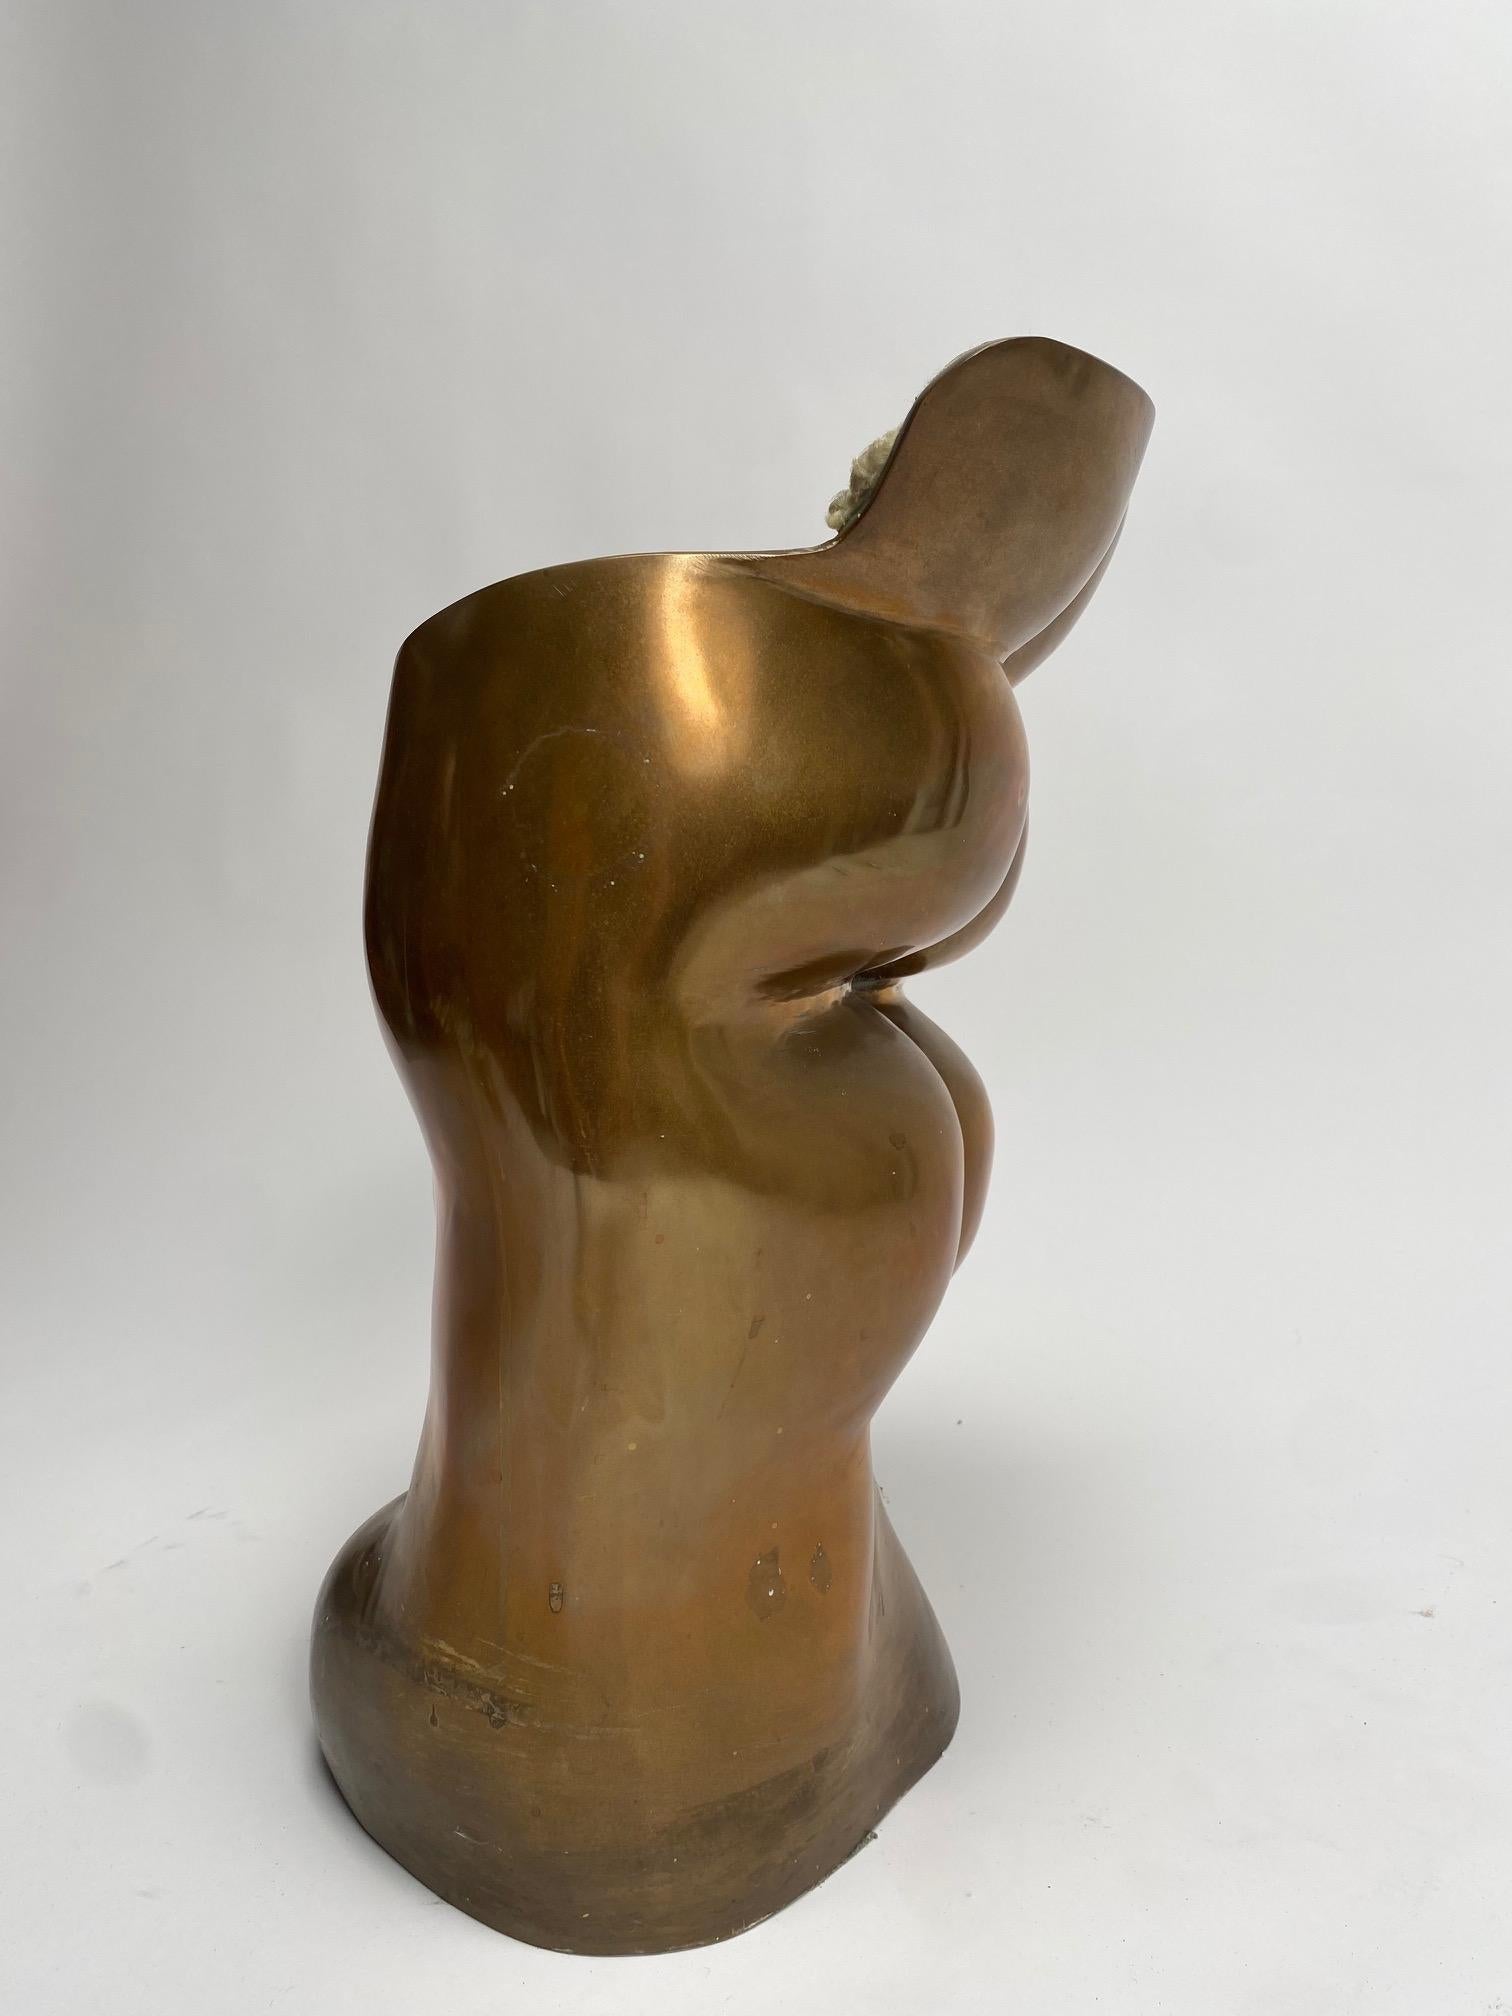 Fausto bronze sculpture stool by Novello Finotti, 1972 Original Gavina production

Fausto, a small seat with a humanoid presence, represents in an exemplary way the concept of Ultramobile, the operation conceived by Dino Gavina in 1971, born with